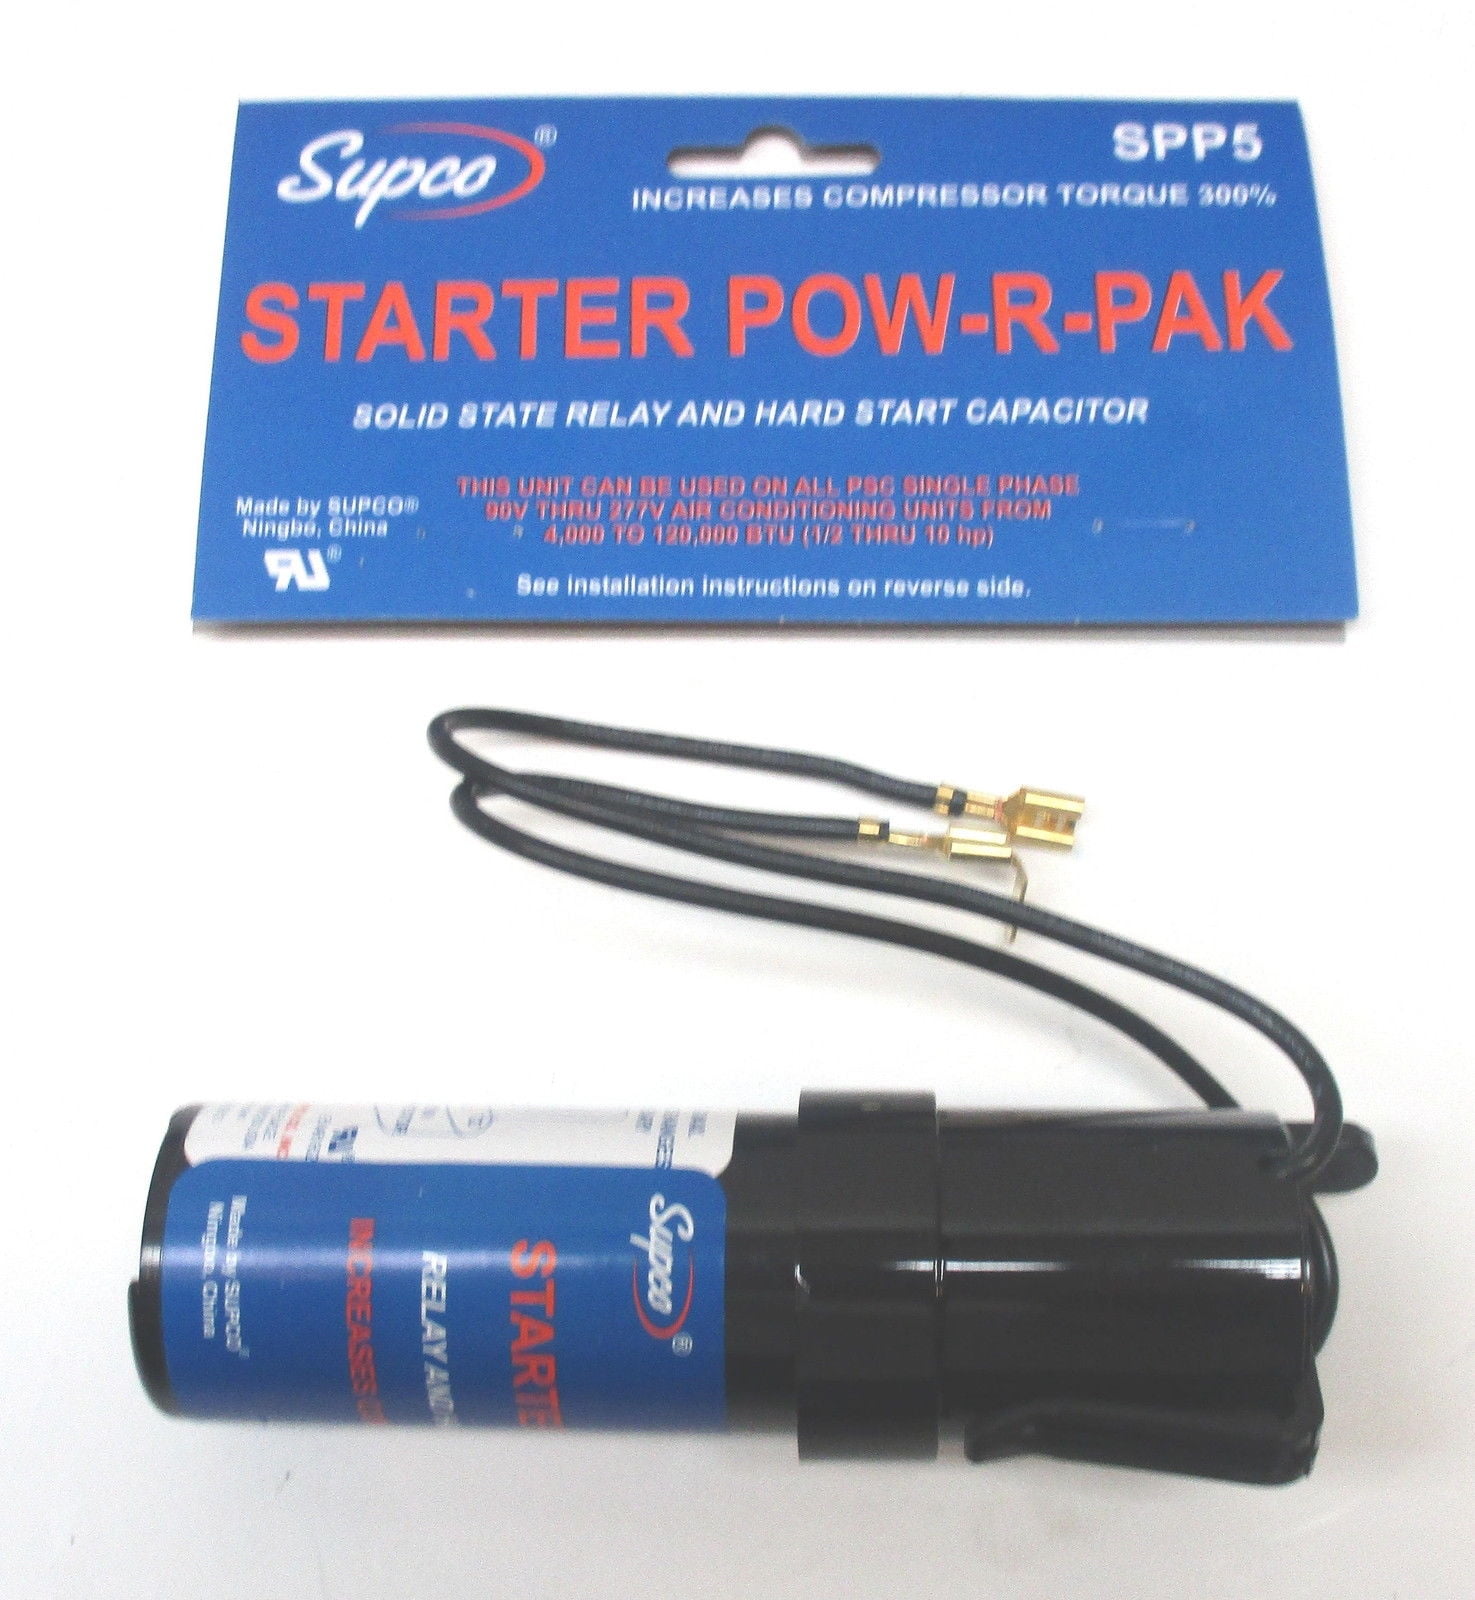 SUPCO SUPER BOOST RELAY AND HARD START CAPACITOR SPP6 